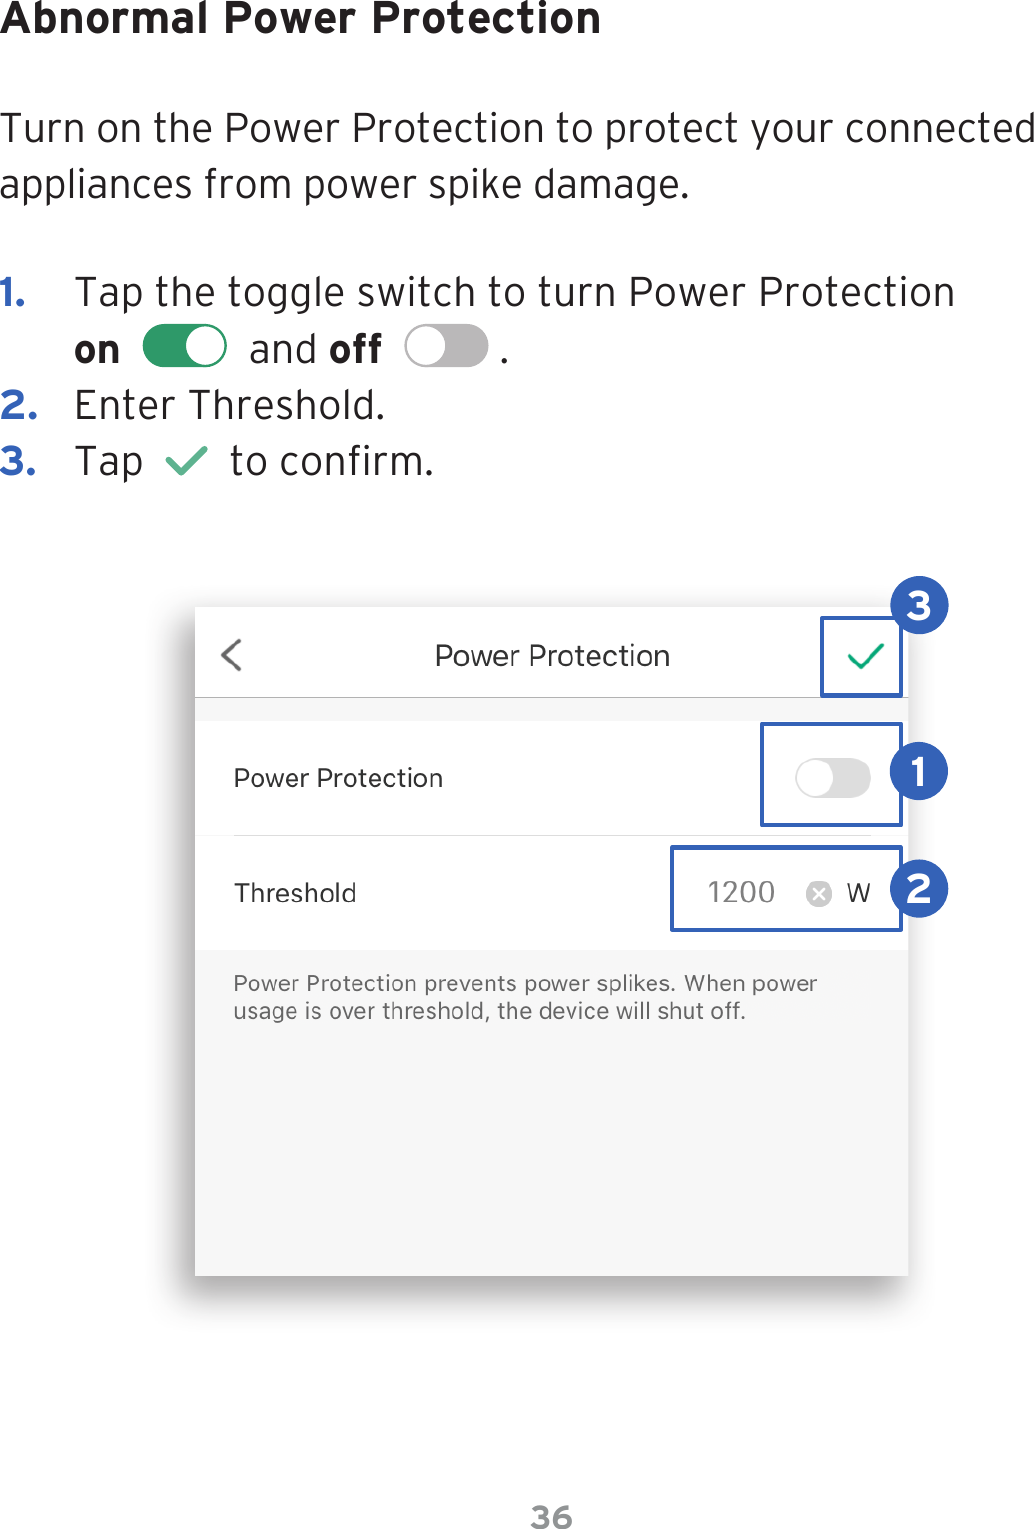 36Abnormal Power ProtectionTurn on the Power Protection to protect your connected appliances from power spike damage.1.  Tap the toggle switch to turn Power Protection  on     and off    .2.  Enter Threshold.3.  Tap     to conrm.123